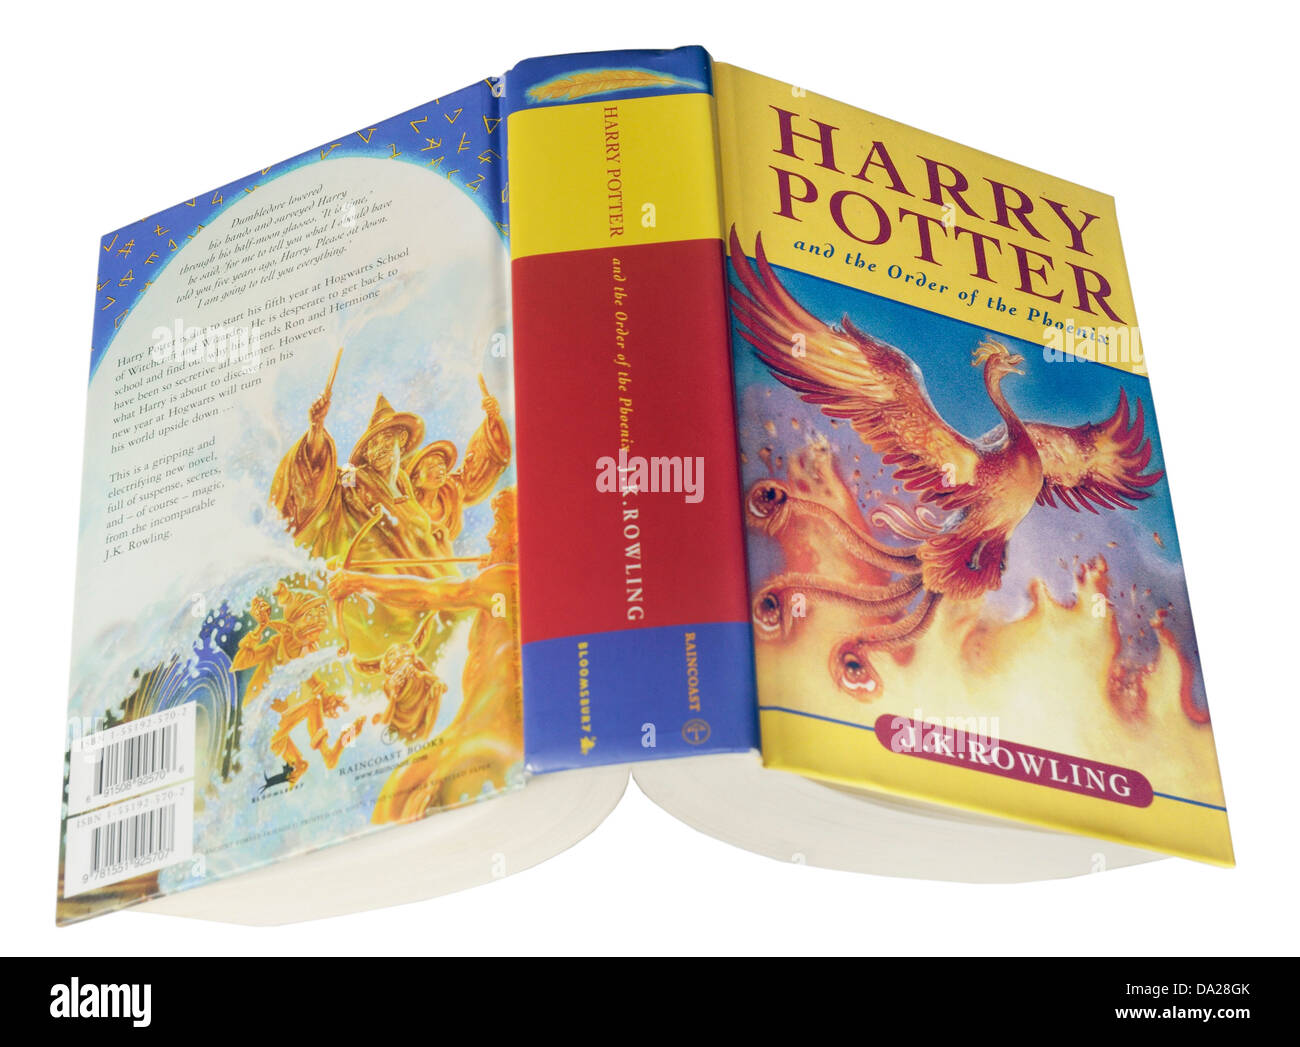 The 5th Harry Potter book Harry Potter and the Order of the Phoenix Stock Photo